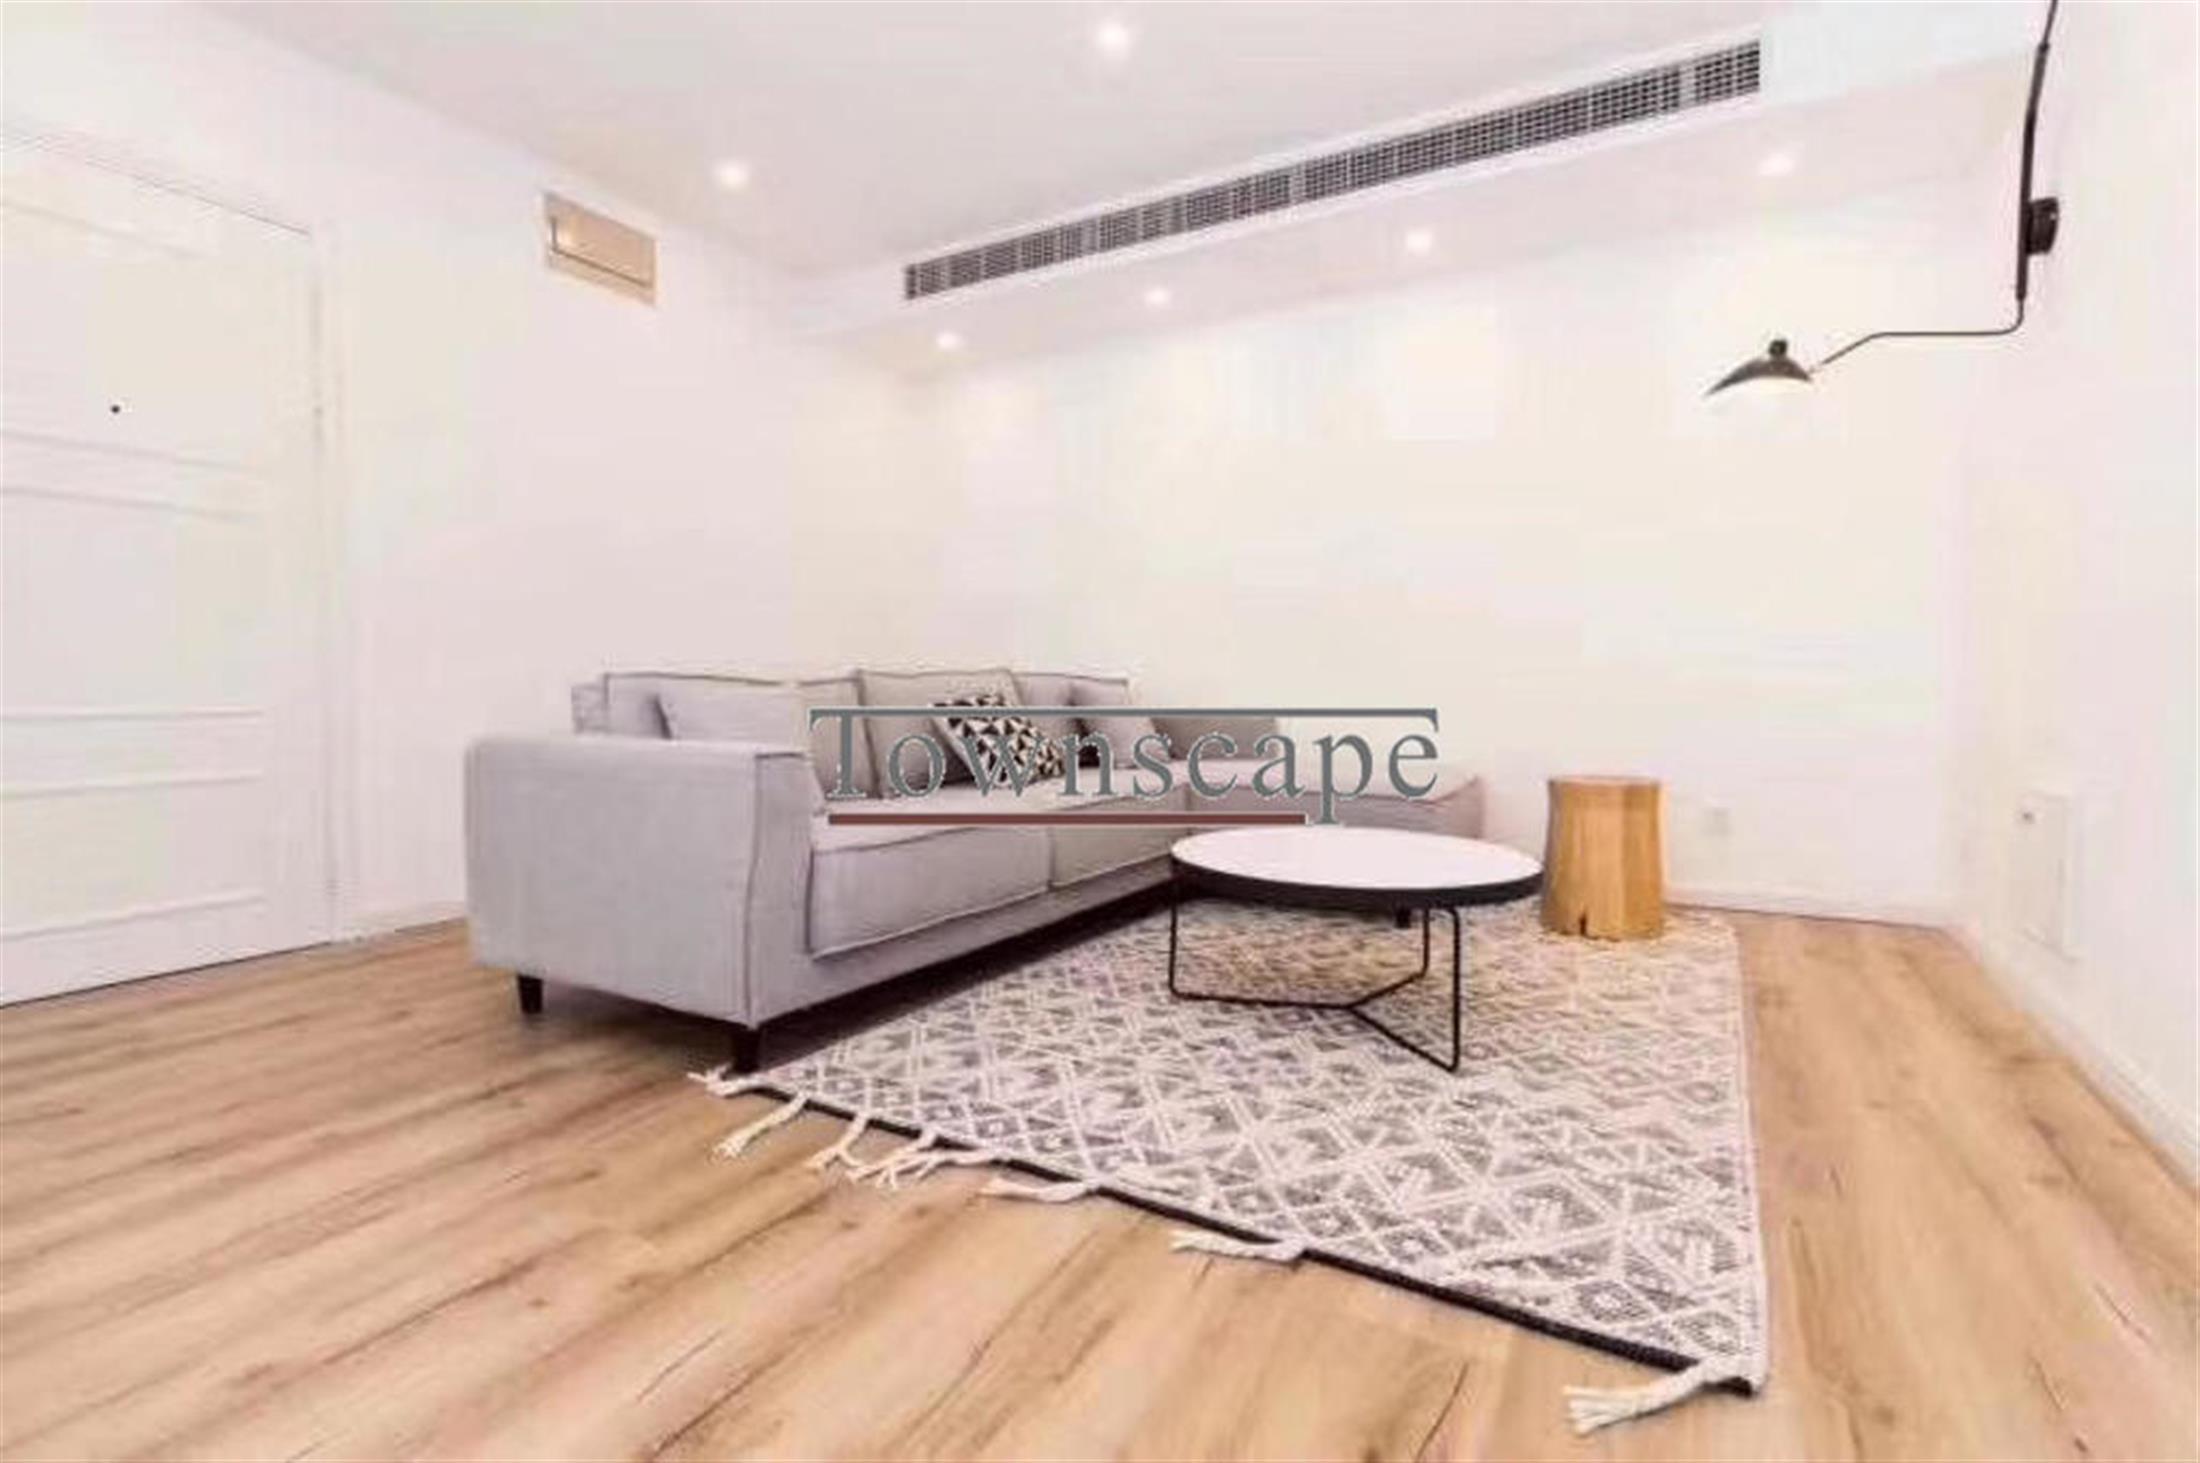 Spacious Living Room Spacious Renovated FFC Courtyards Apartment w Great Views for Rent in Shanghai